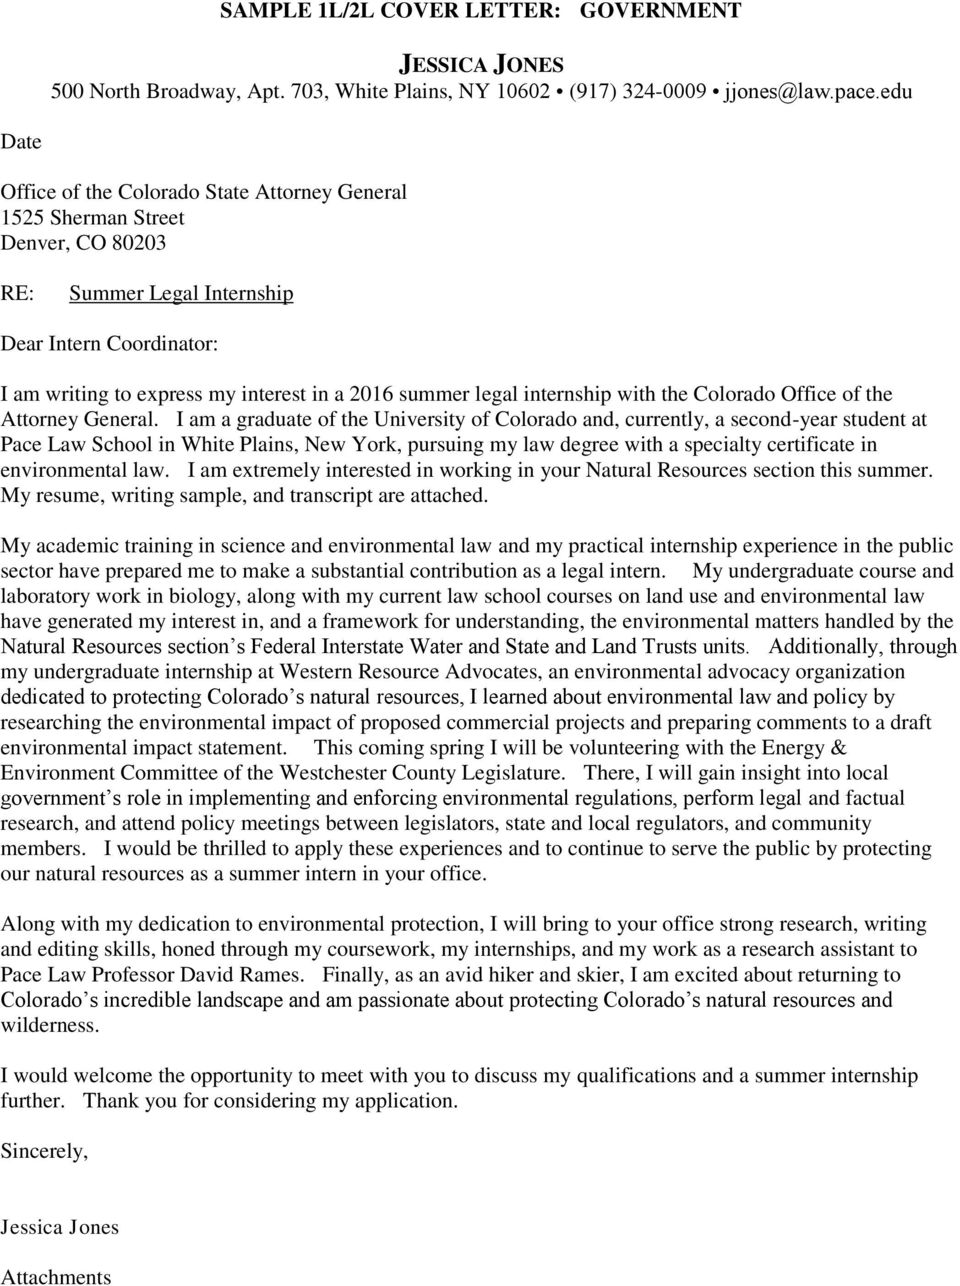 Attorney Cover Letter Sample from docplayer.net